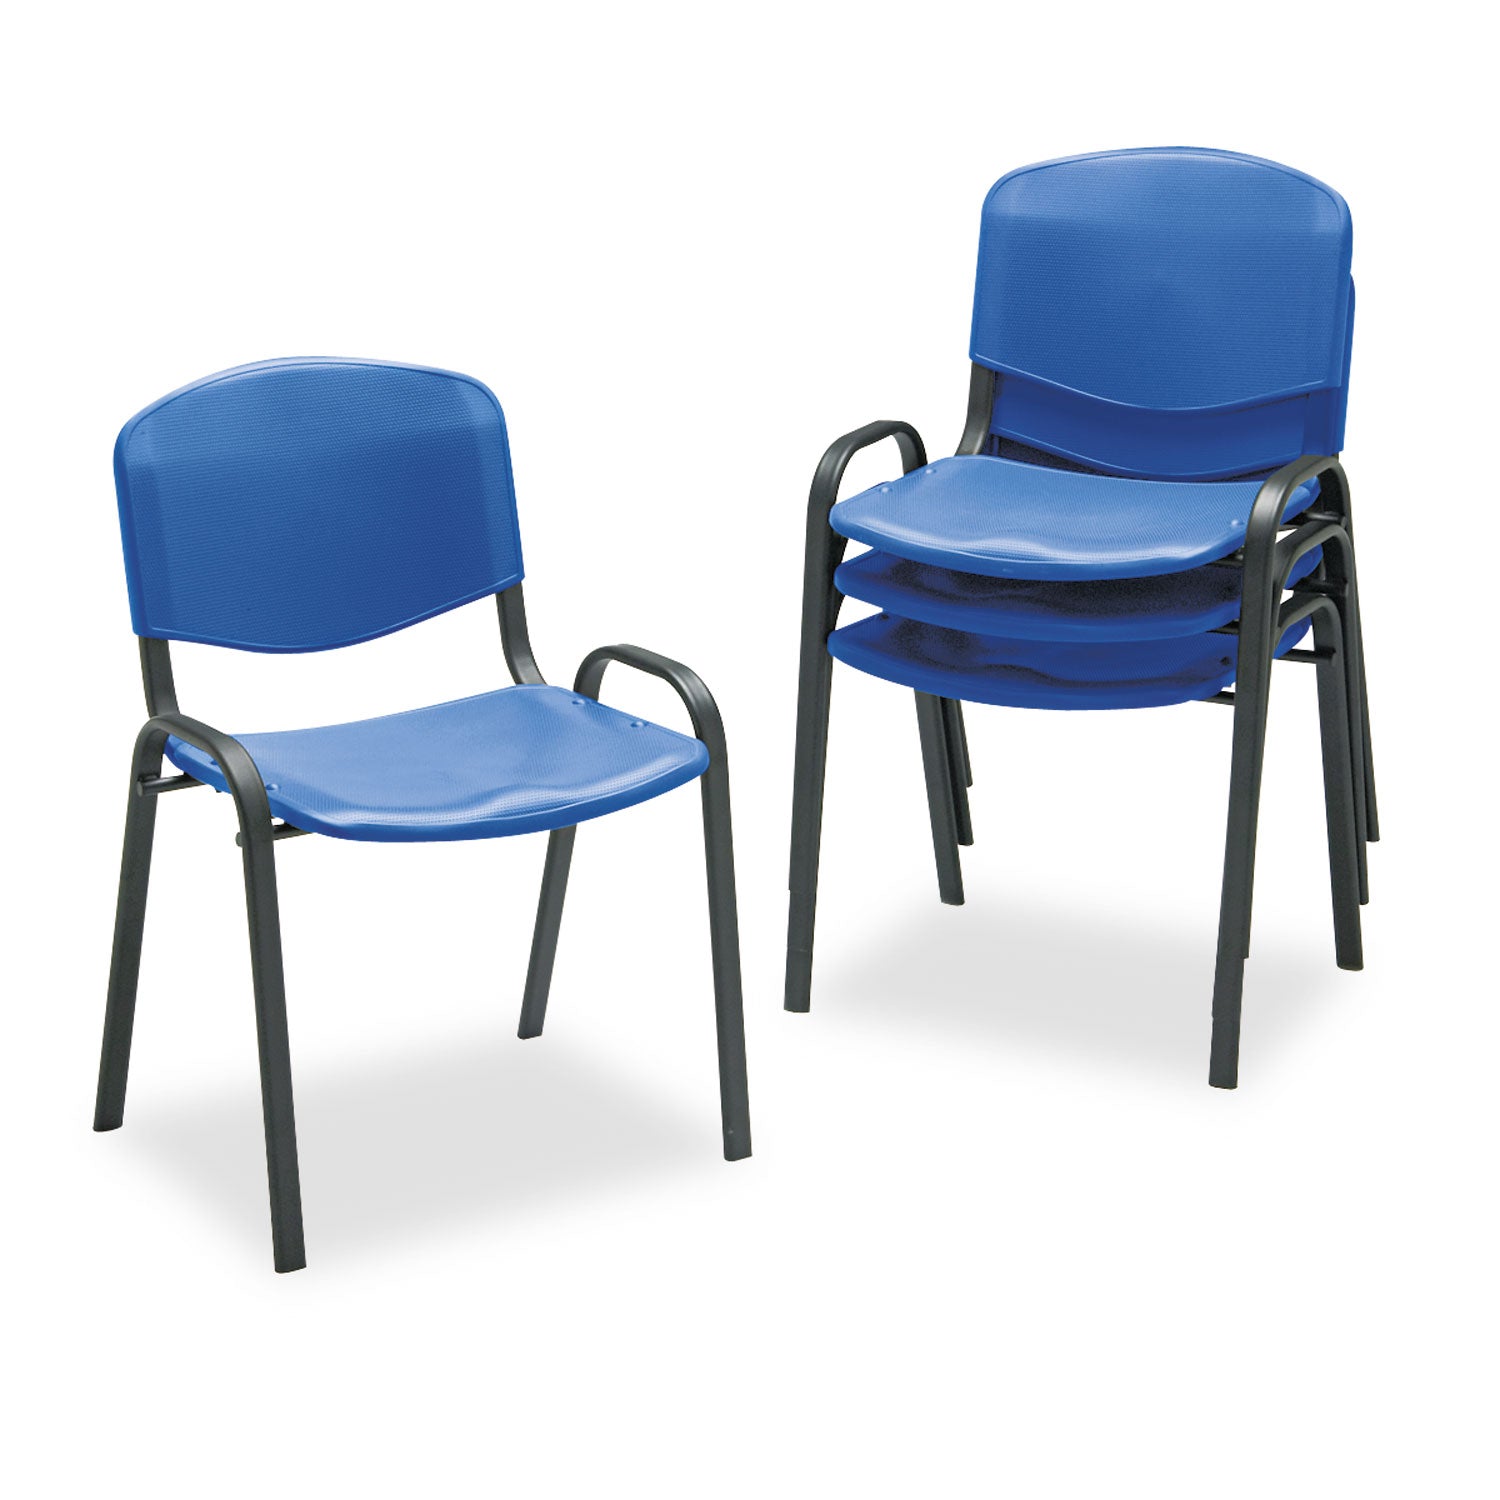 Stacking Chair, Supports Up to 250 lb, 18" Seat Height, Blue Seat, Blue Back, Black Base, 4/Carton - 